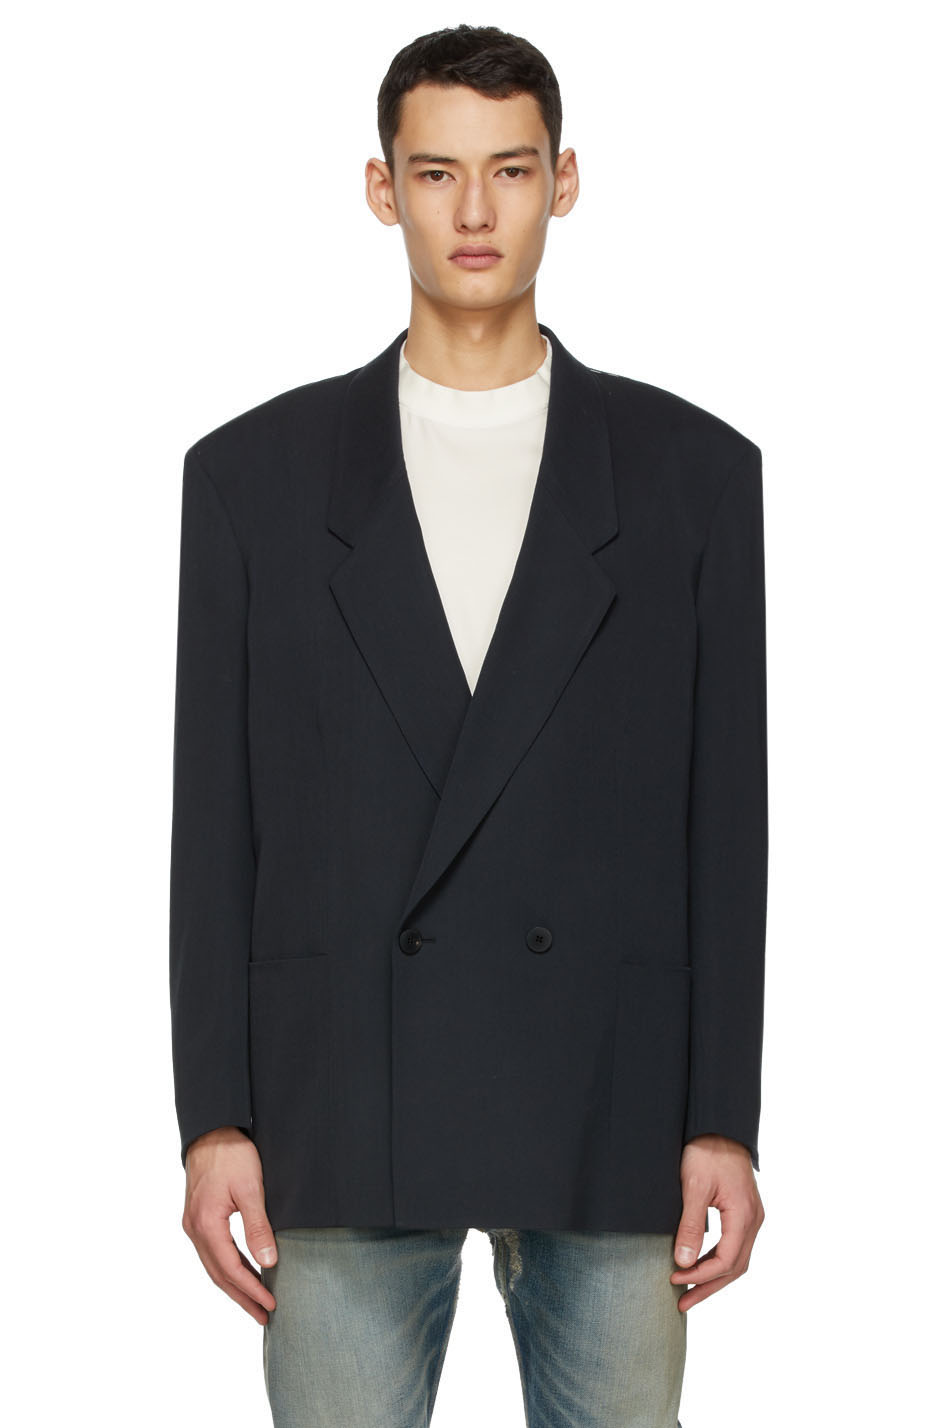 Fear Of God Zegna Double Breasted Jacket Poland, SAVE 59% - mpgc.net